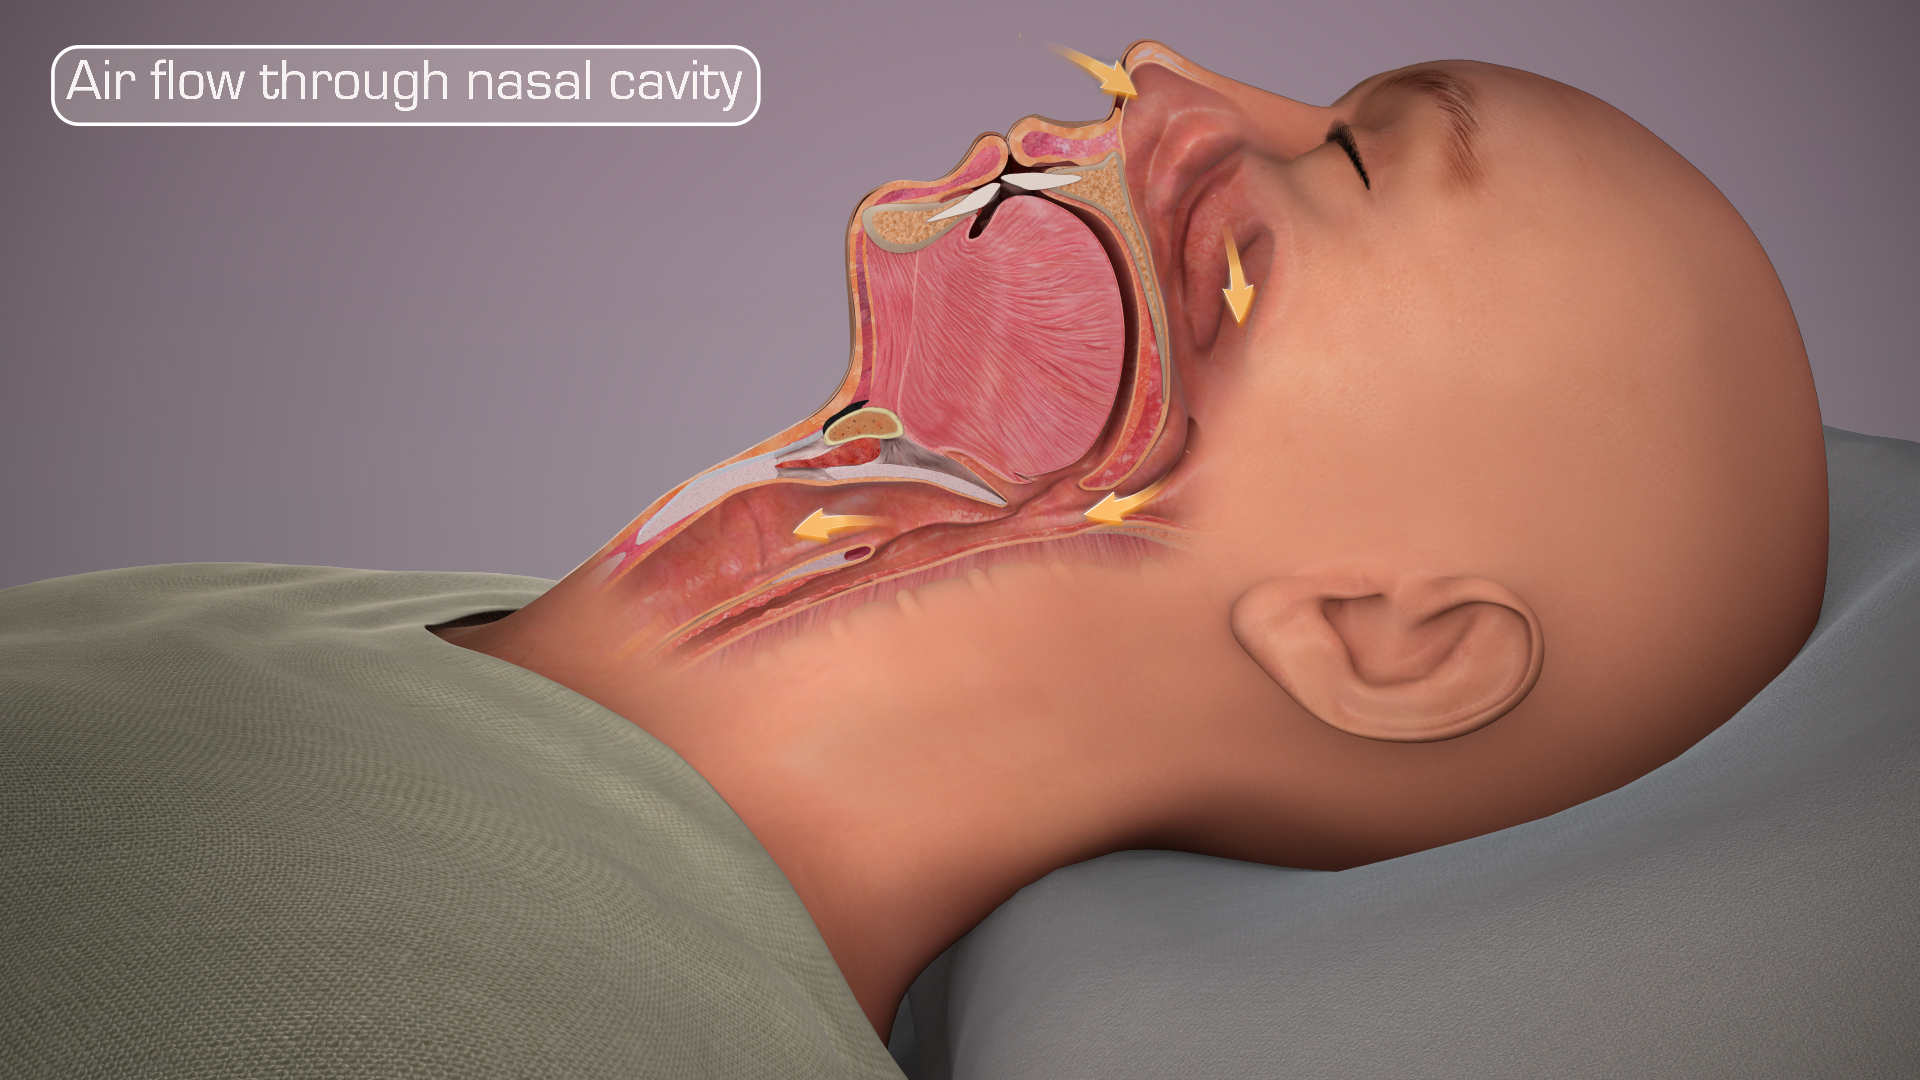 Snoring: Types, Causes, Medicine and Treatment - Scientific Animations